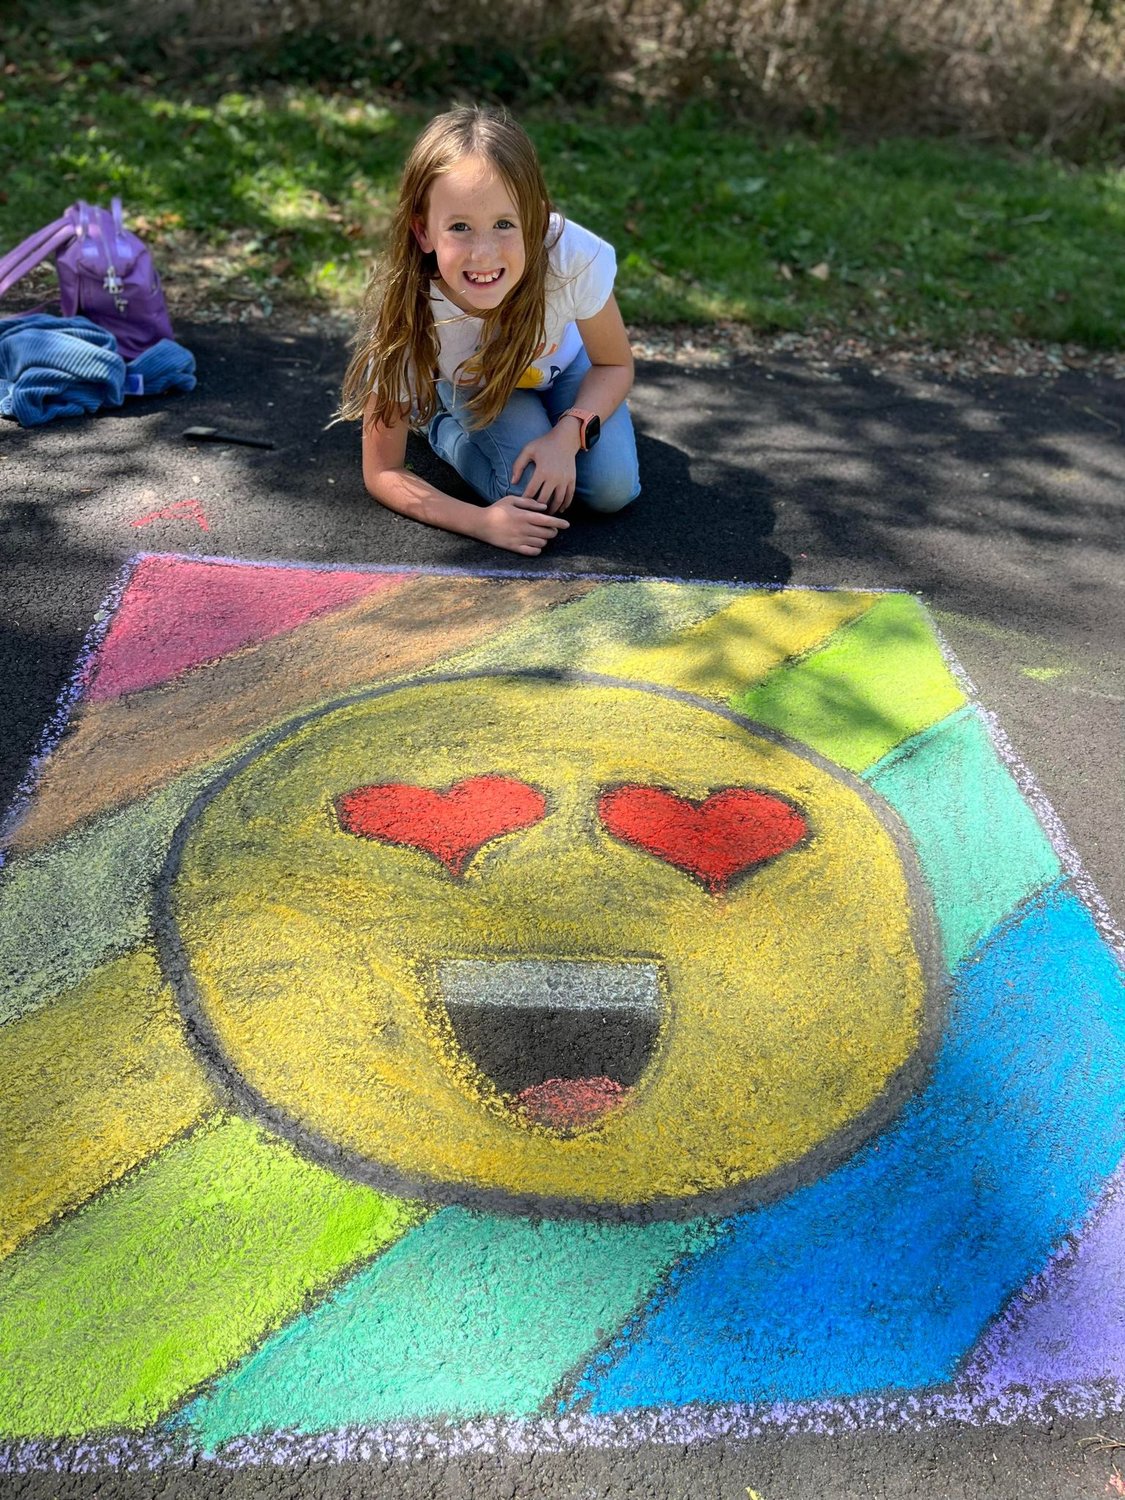 Katie from Blue Point is a big fan of emojis and drew her favorite in her square.